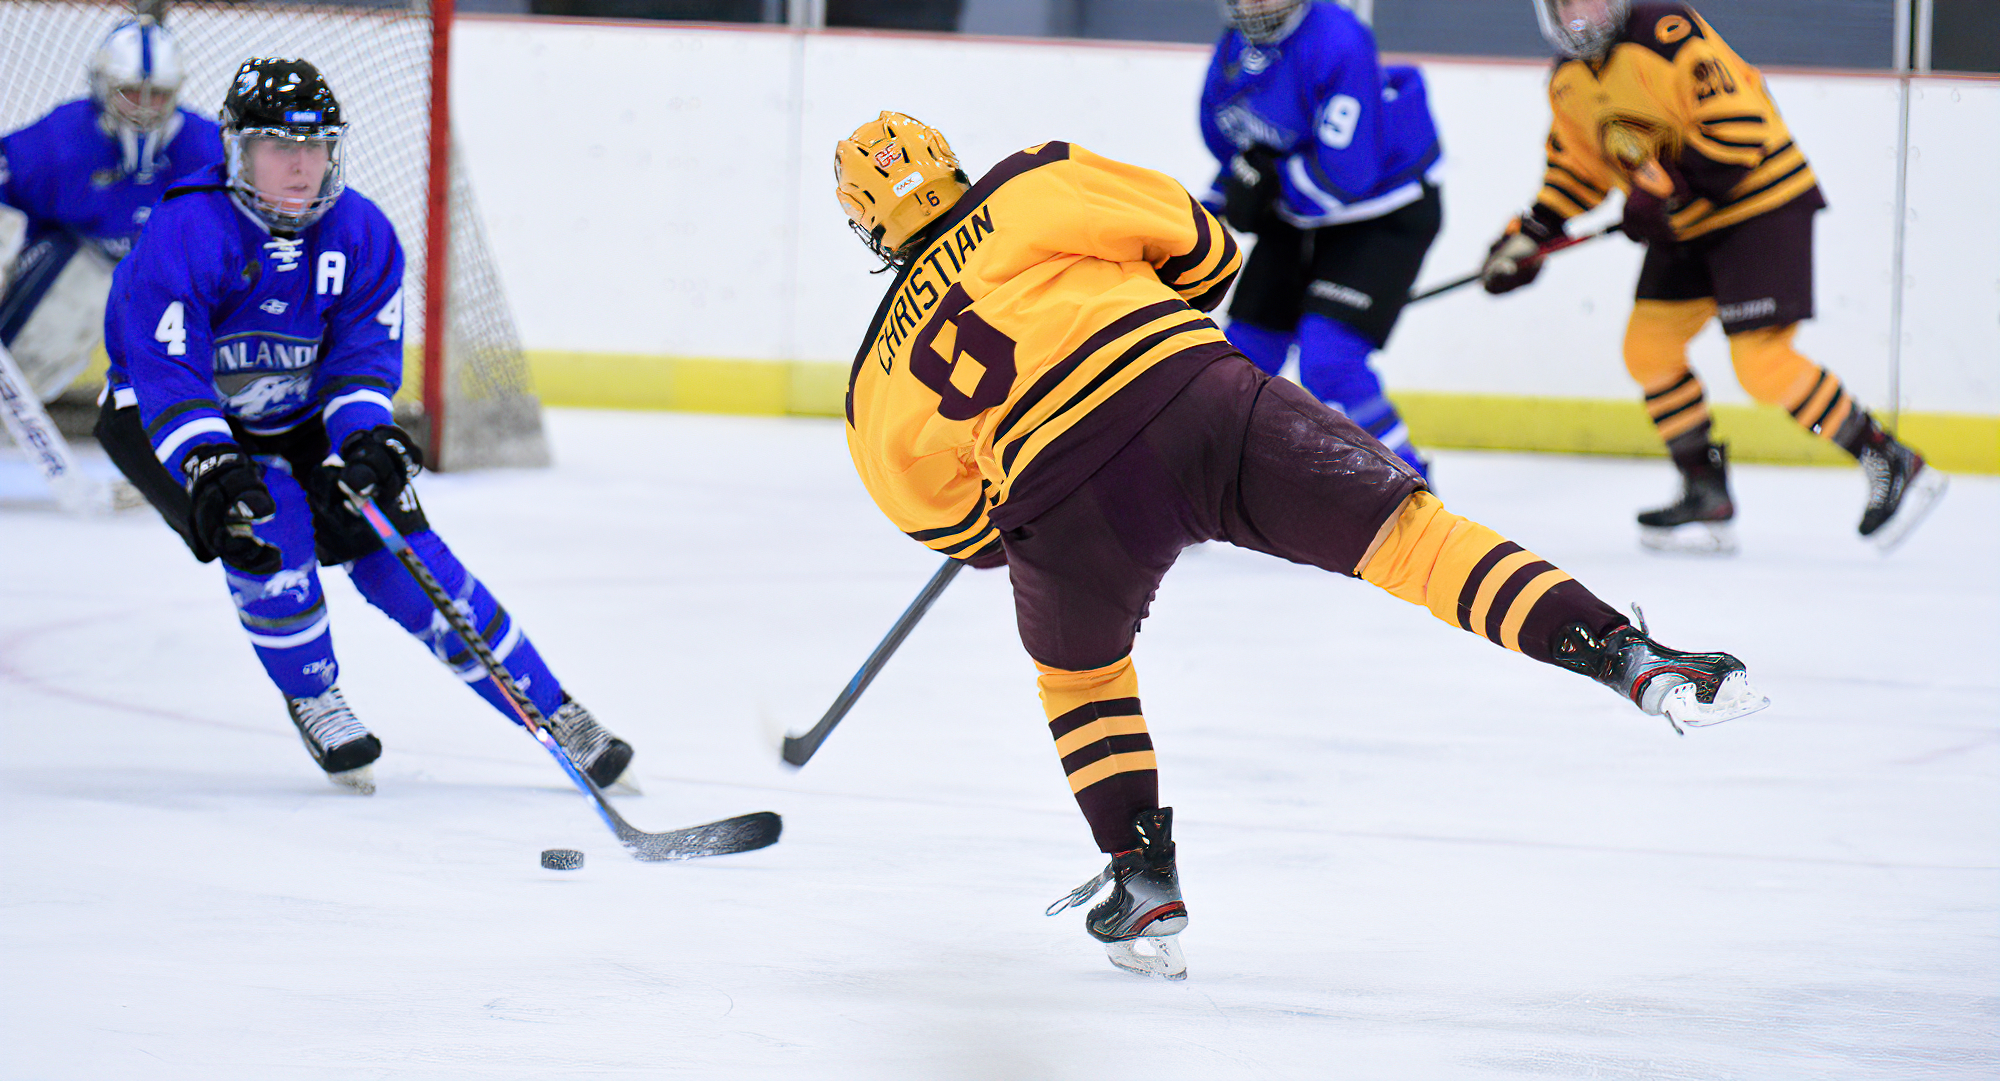 Senior Hannah Christian fired a puck on net. She had two assists in the Cobbers' 6-2 win over Finlandia.